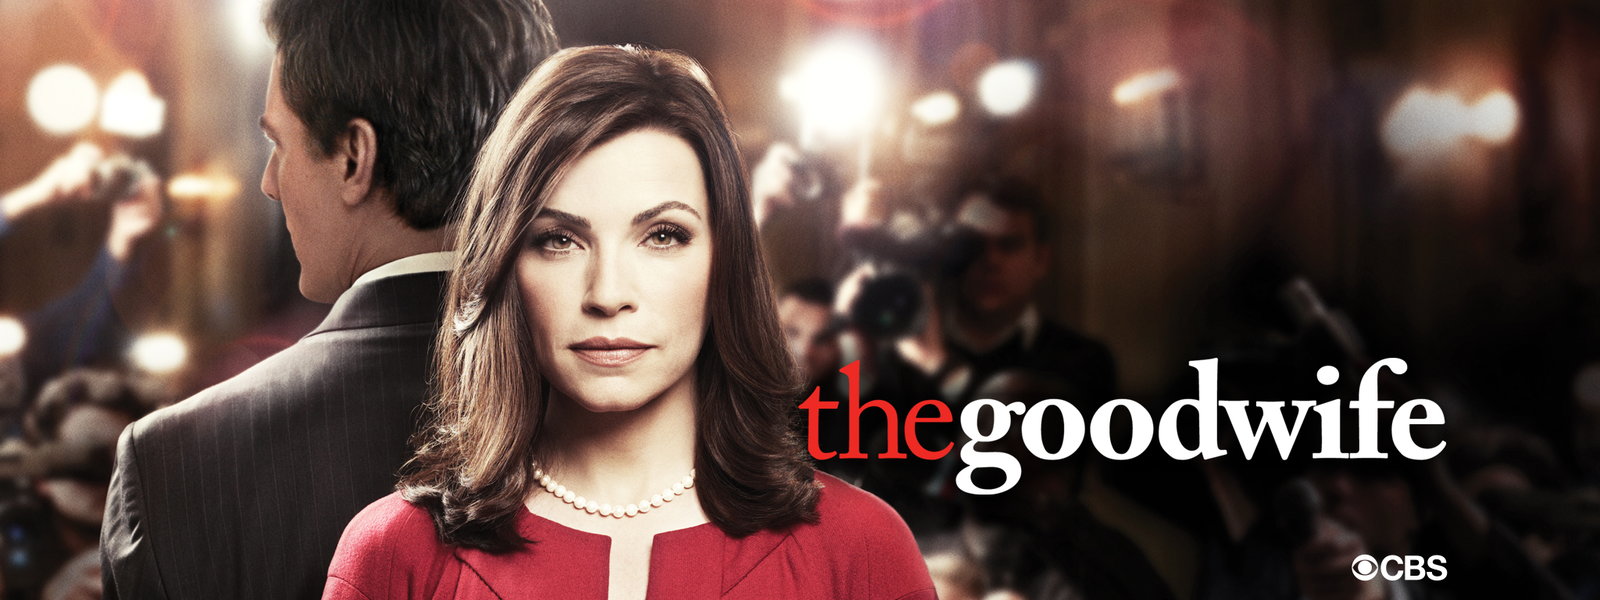 The Good Wife Backgrounds, Compatible - PC, Mobile, Gadgets| 1600x600 px